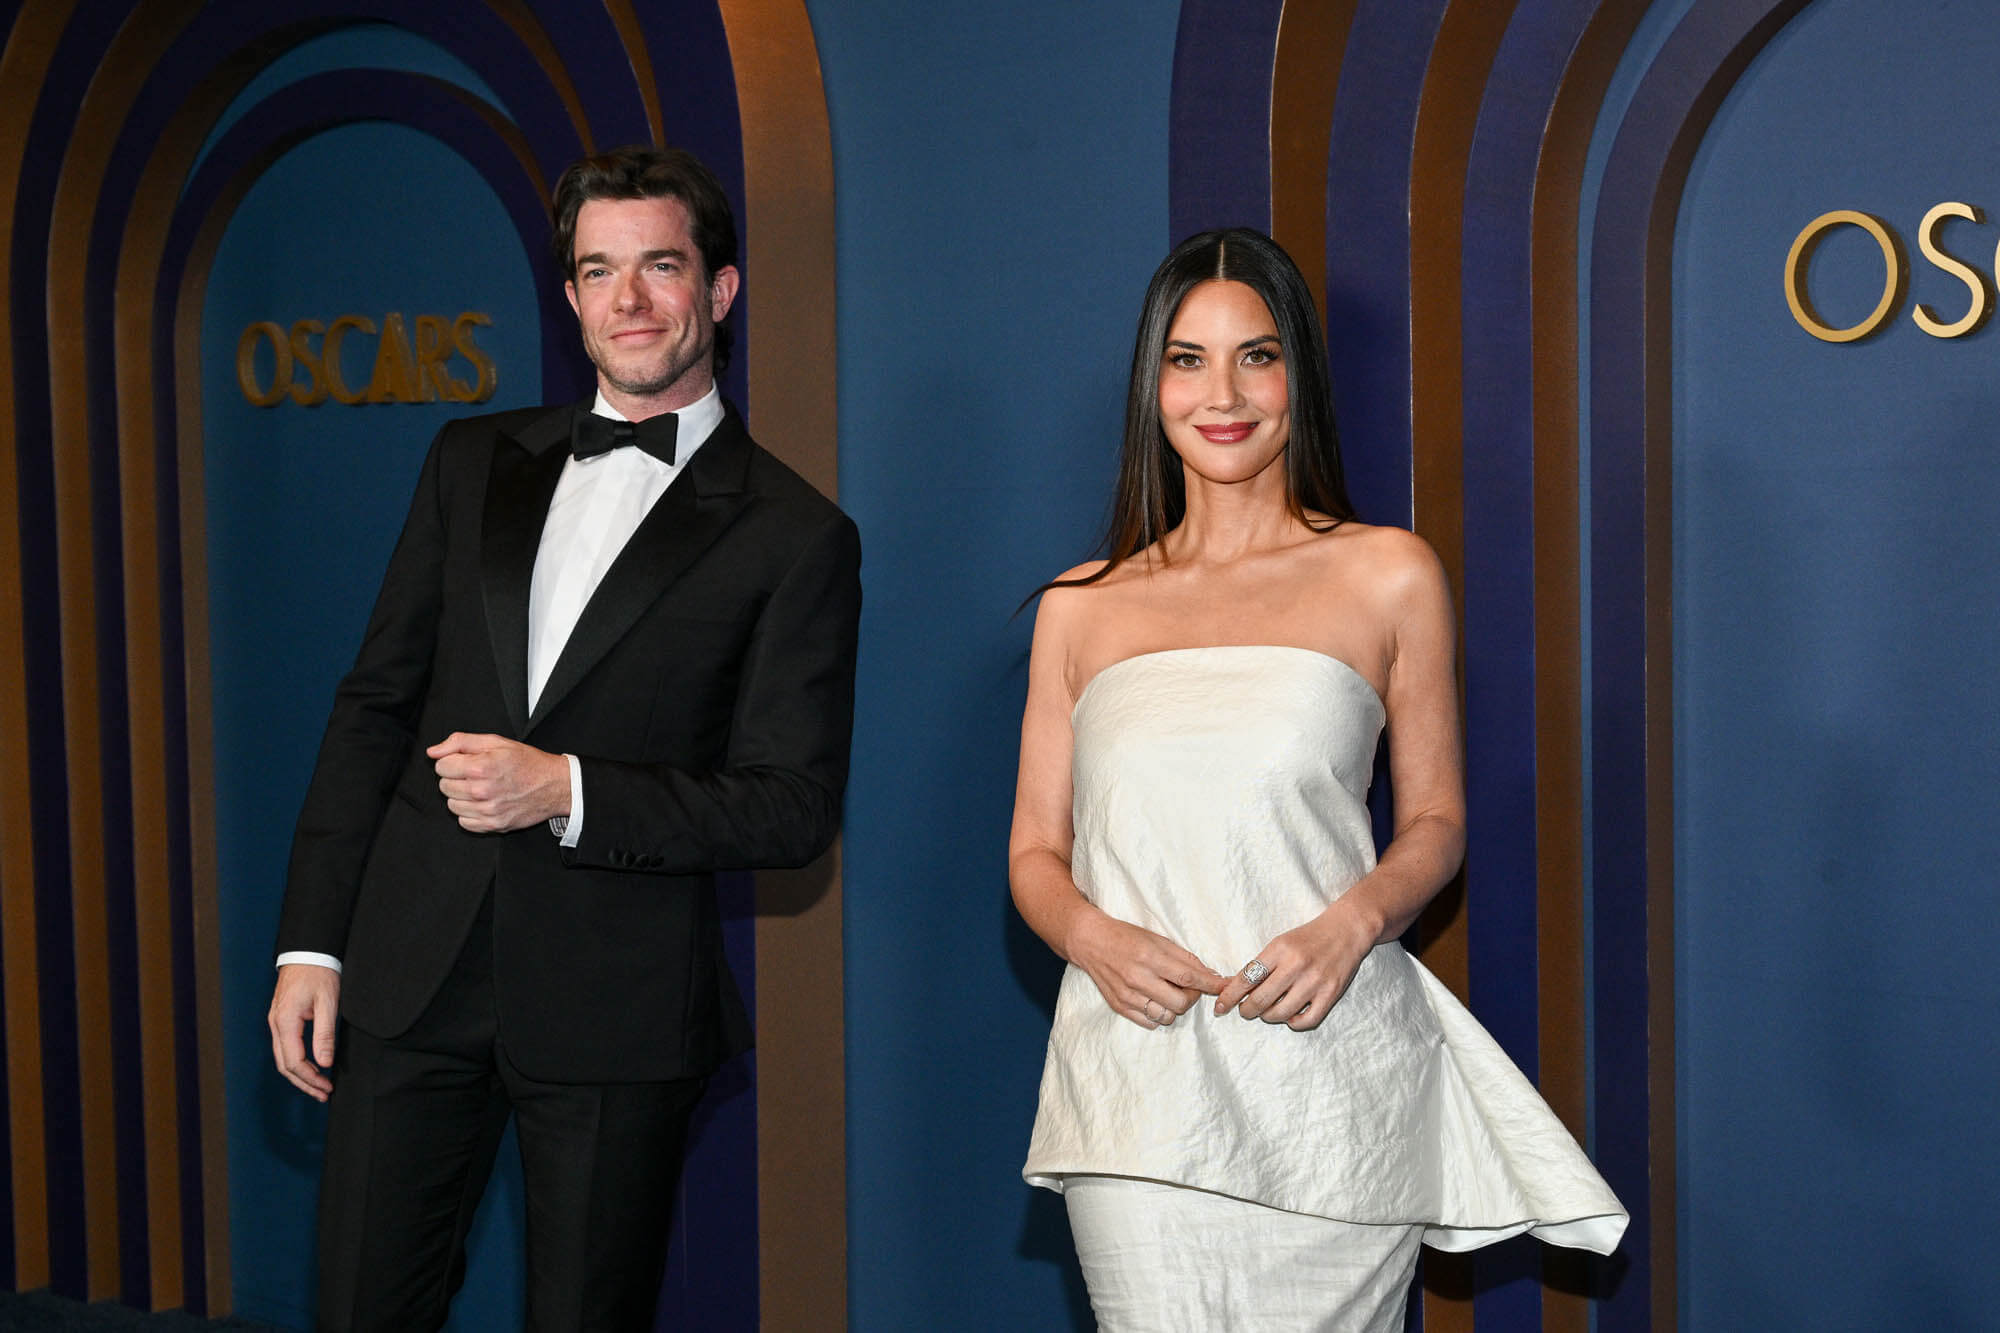 John Mulaney and Olivia Munn make their first red carpet appearance at the Governors Awards and